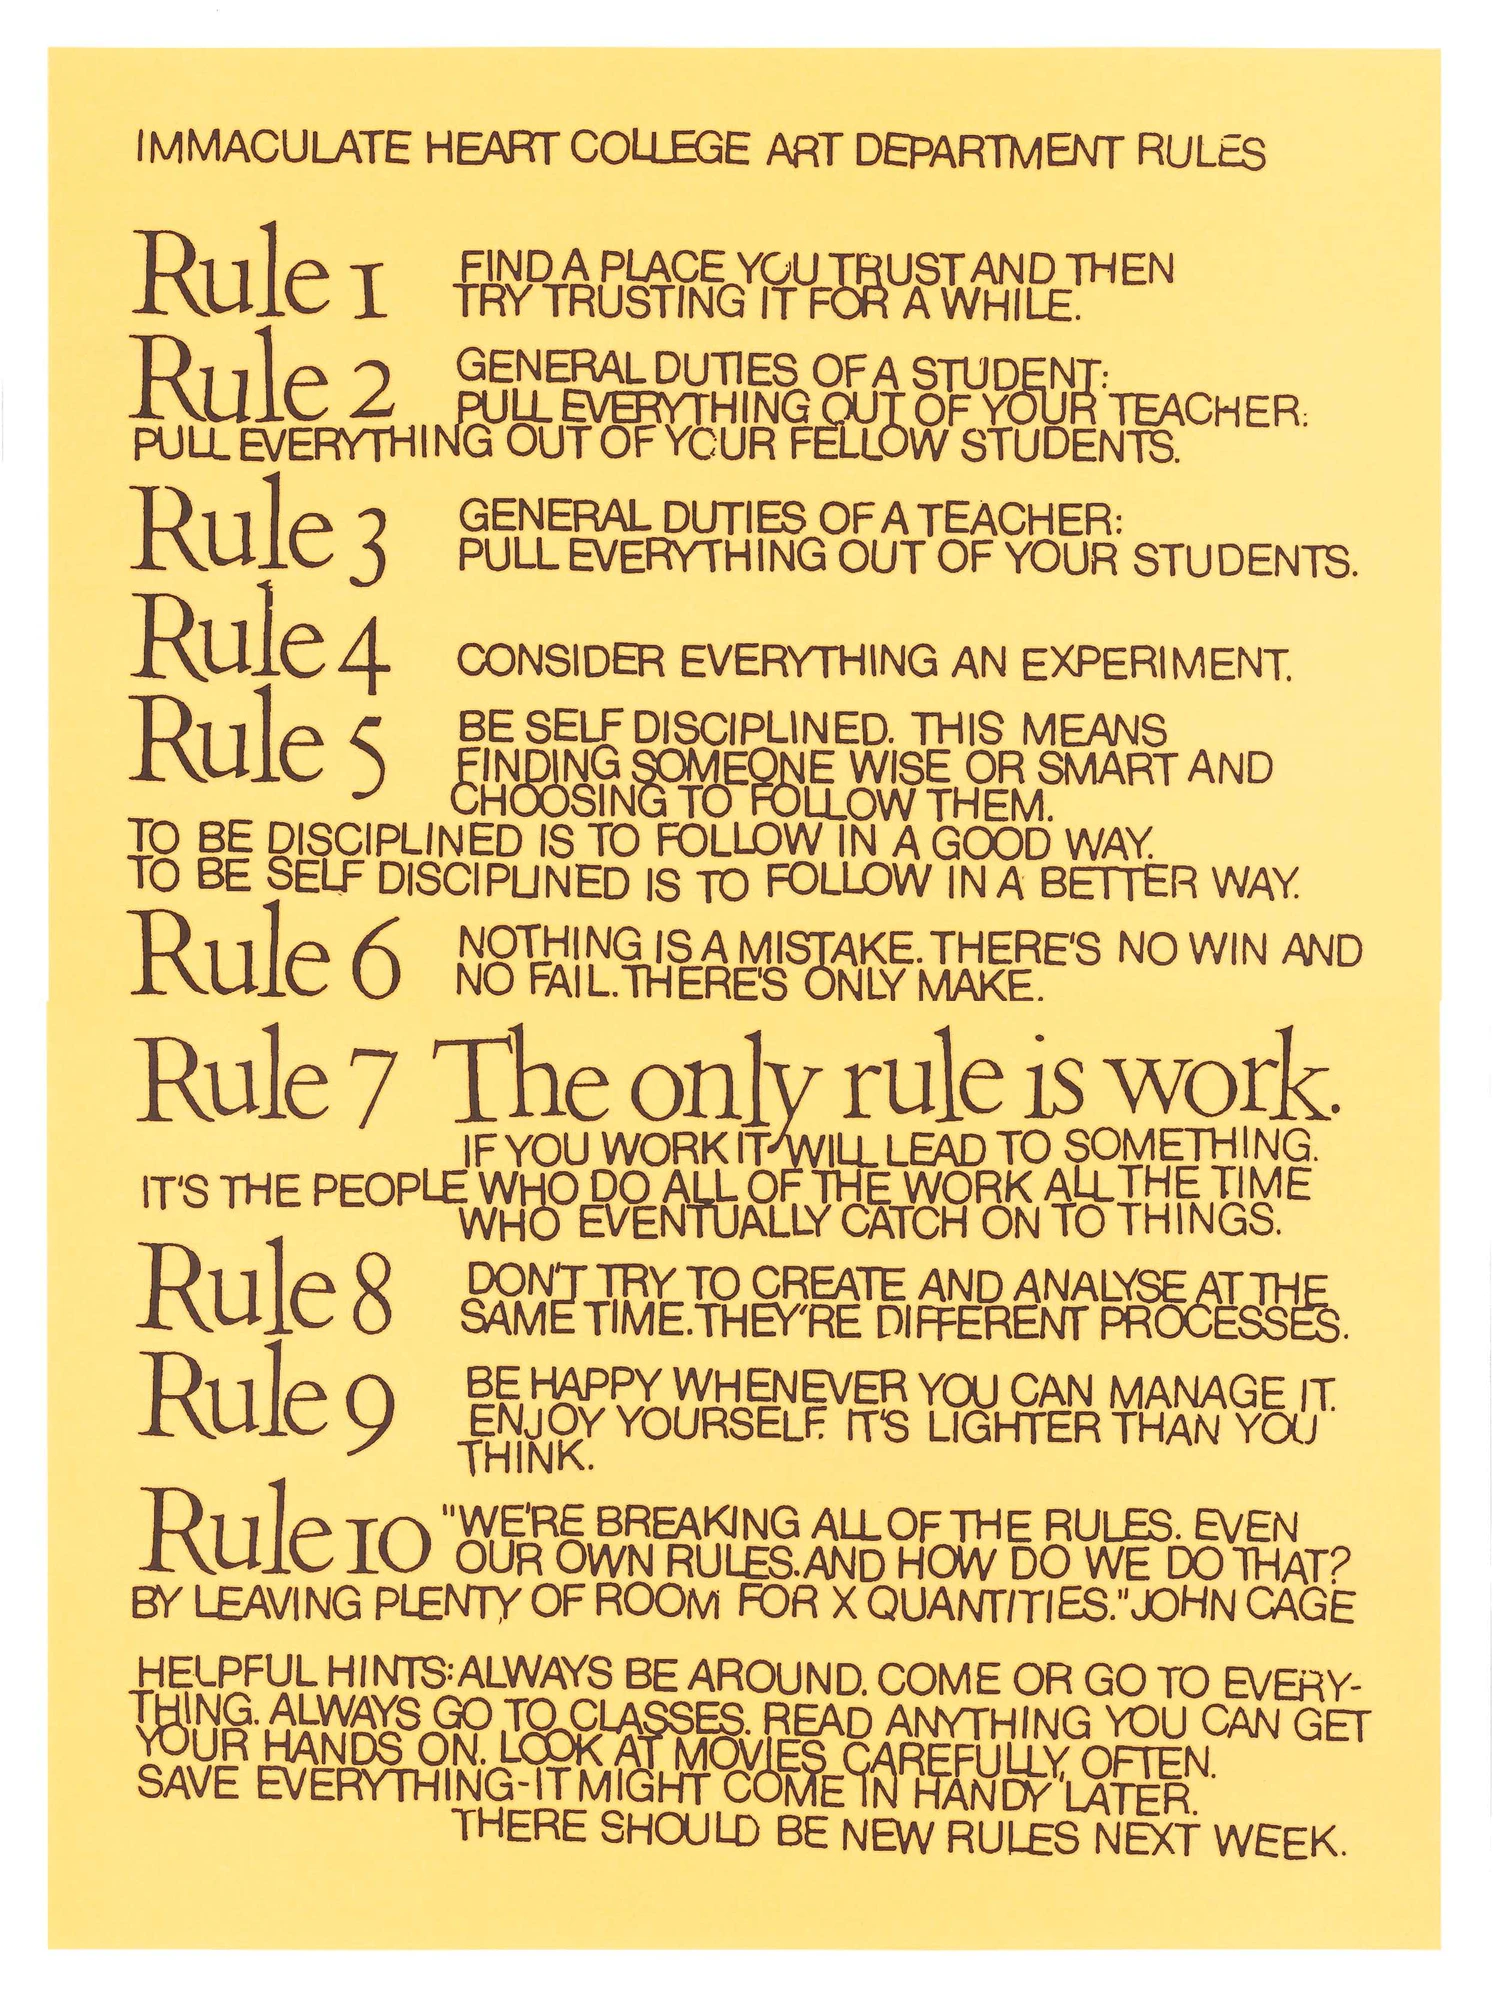 The 10 Rules from Corita Kent